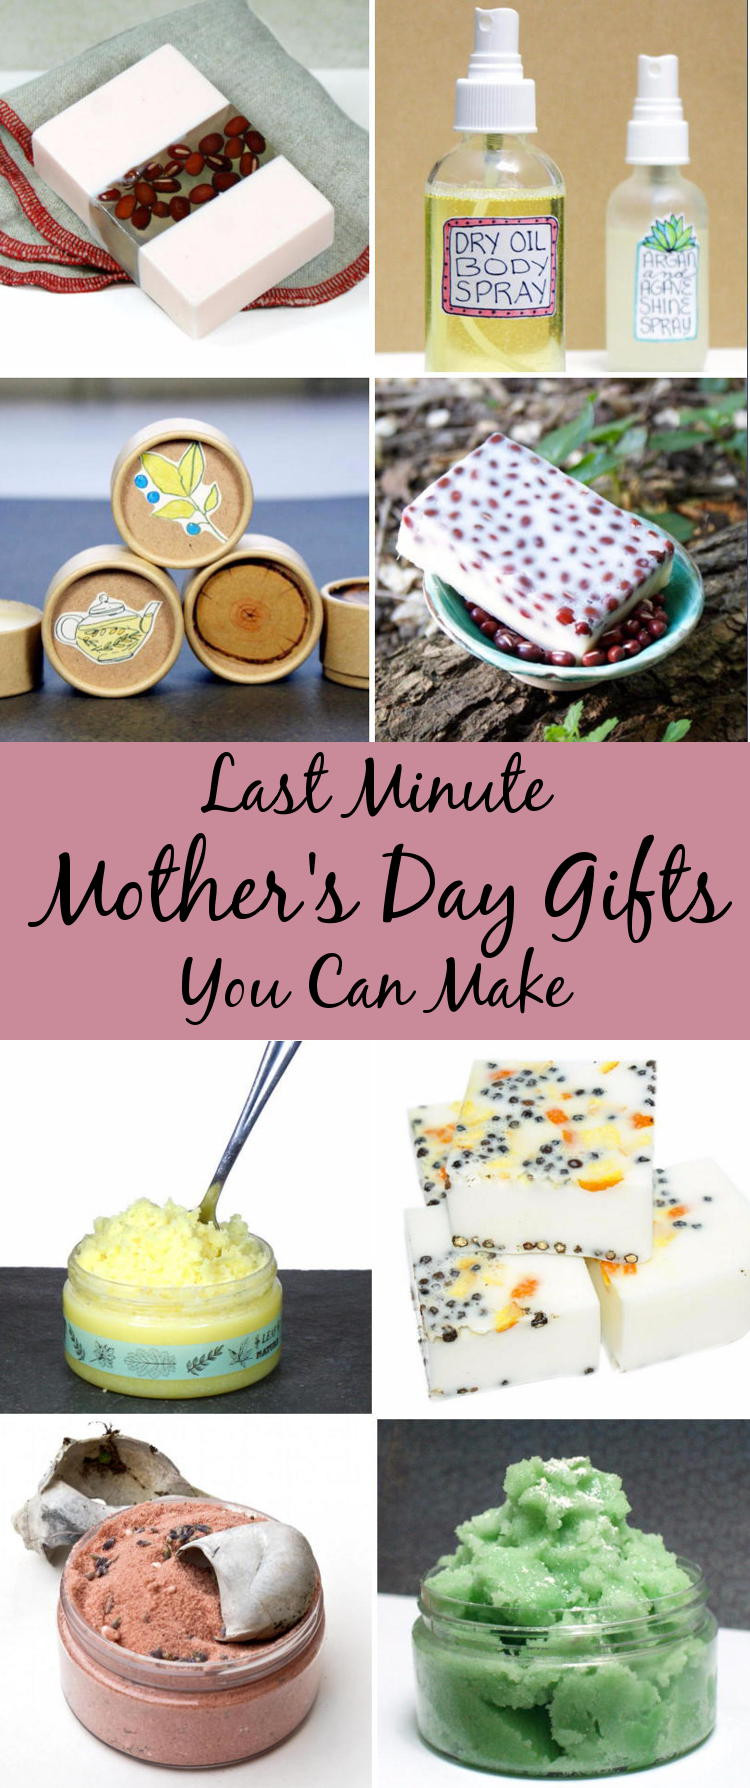 Mothers Days Gift Ideas
 Last Minute Mother s Day Gift Ideas Soap Deli News